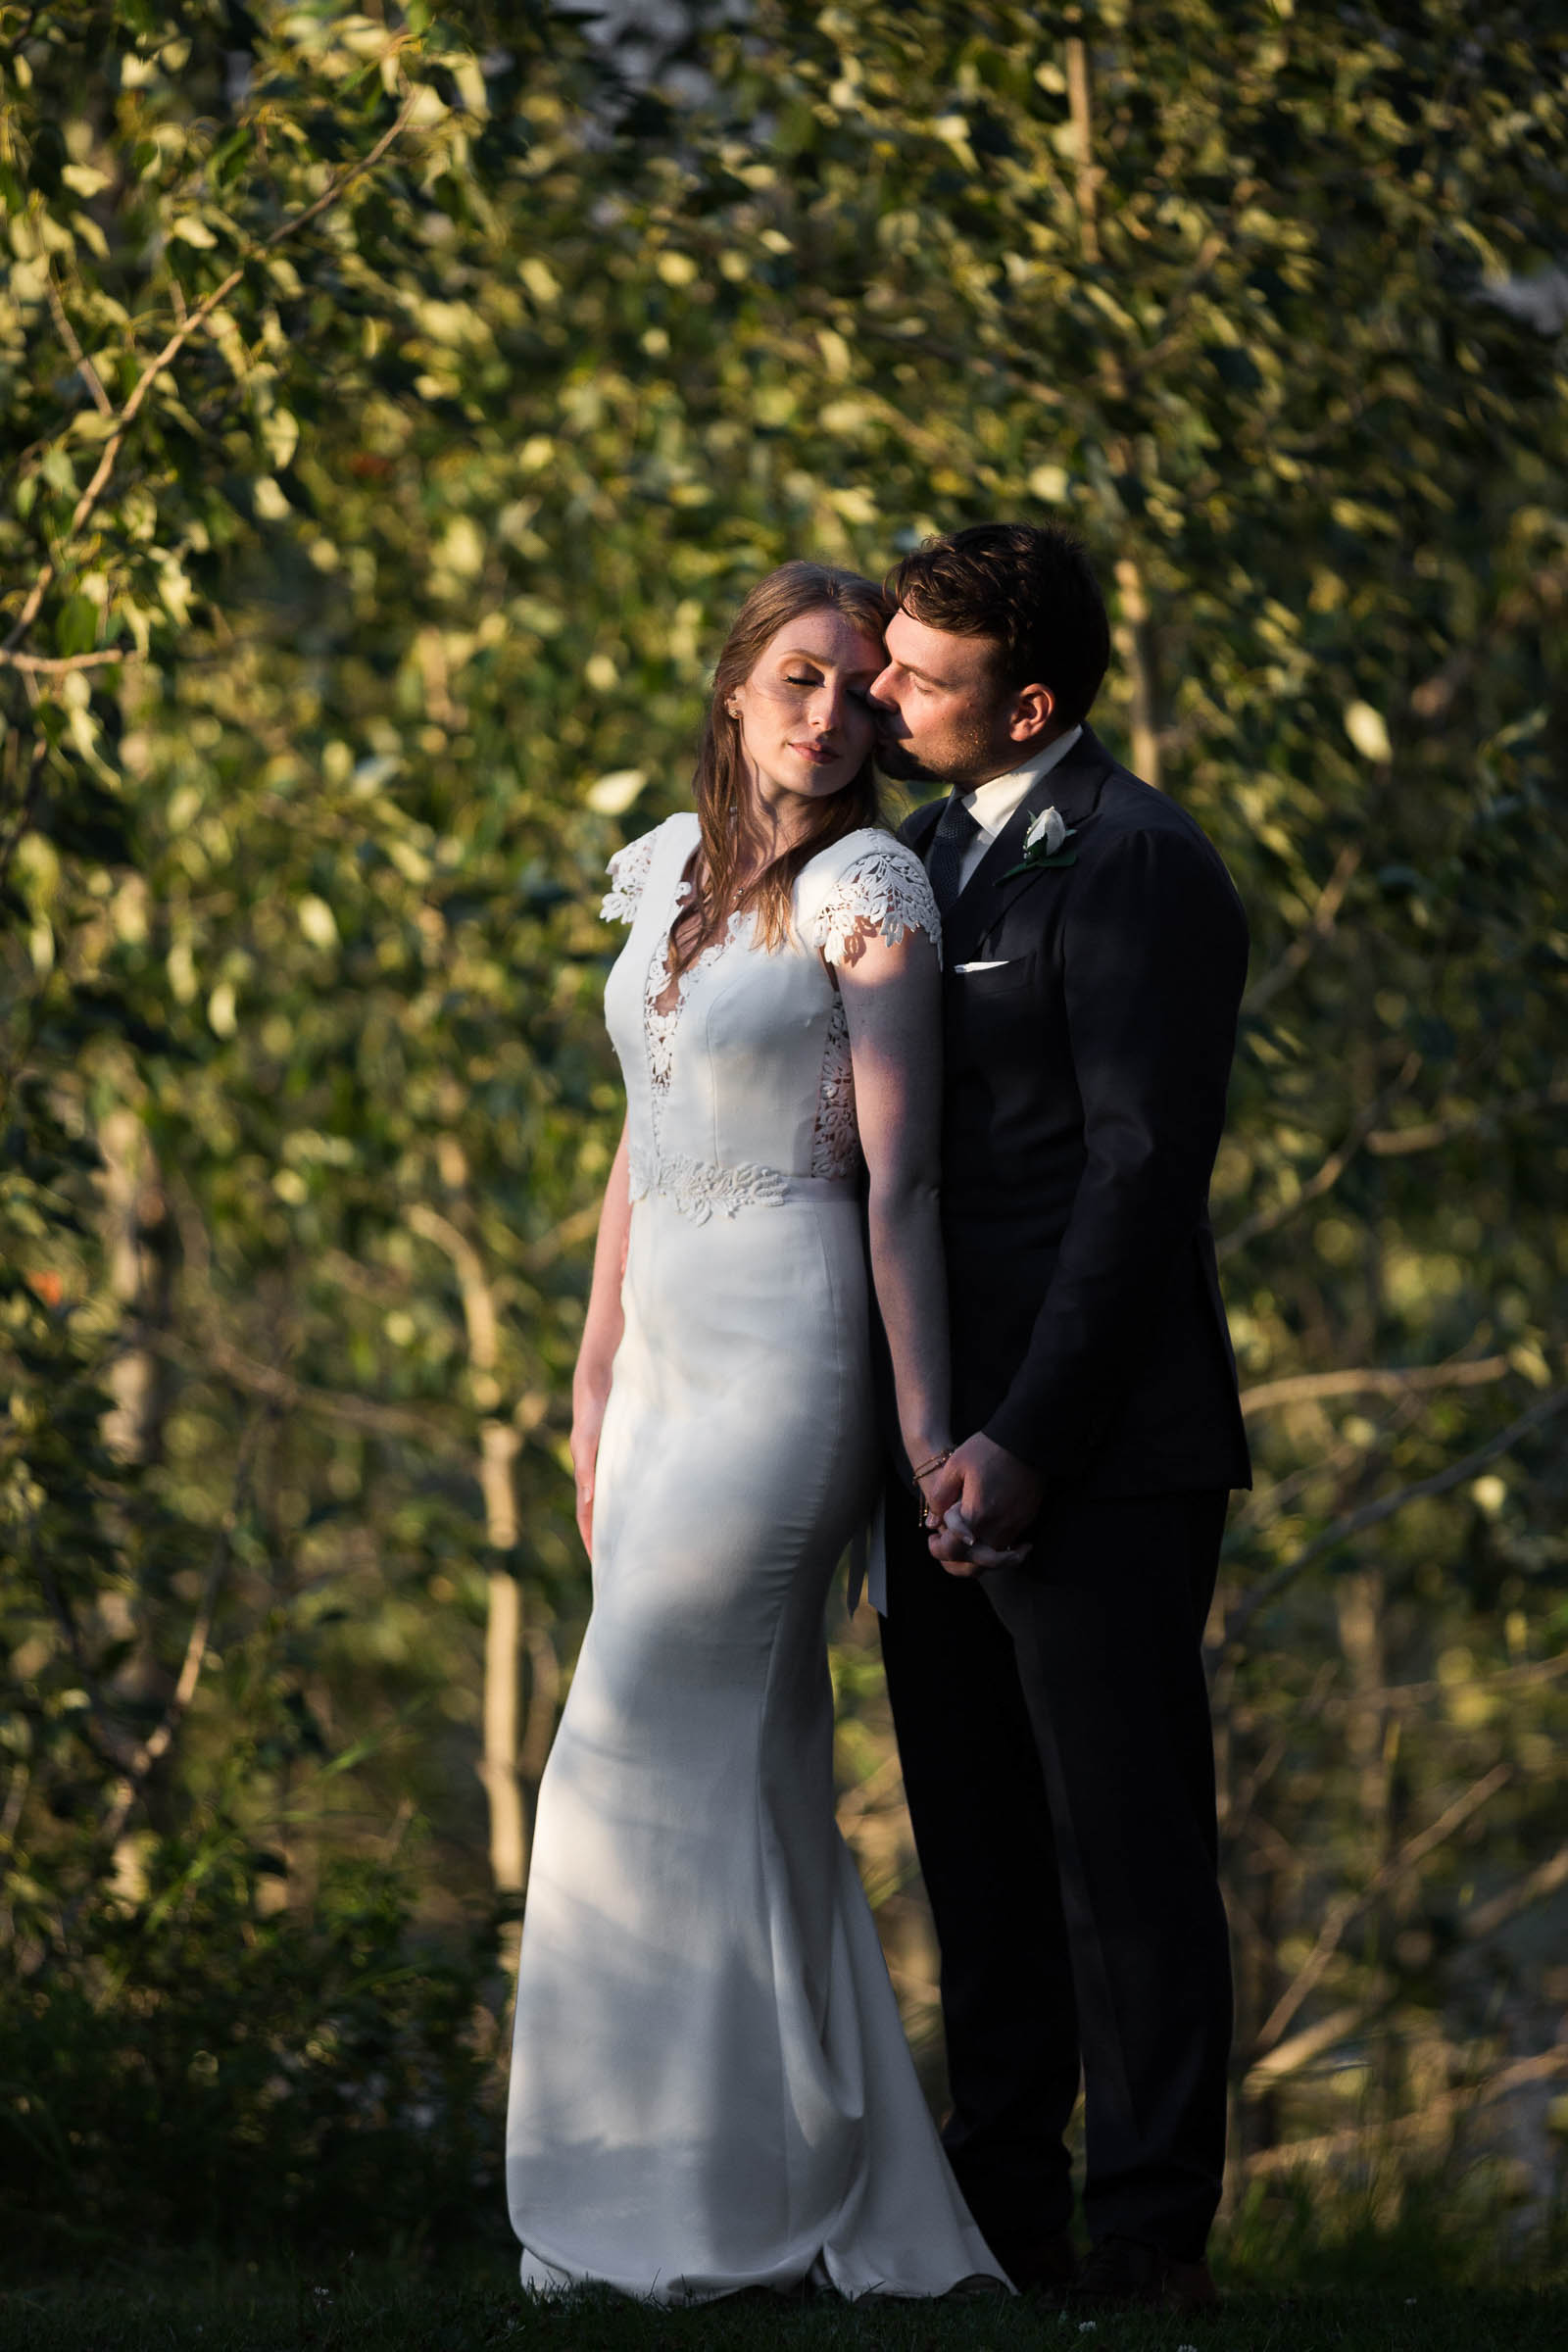 Bride and groom embracing at golden hour in front of wall of greenery